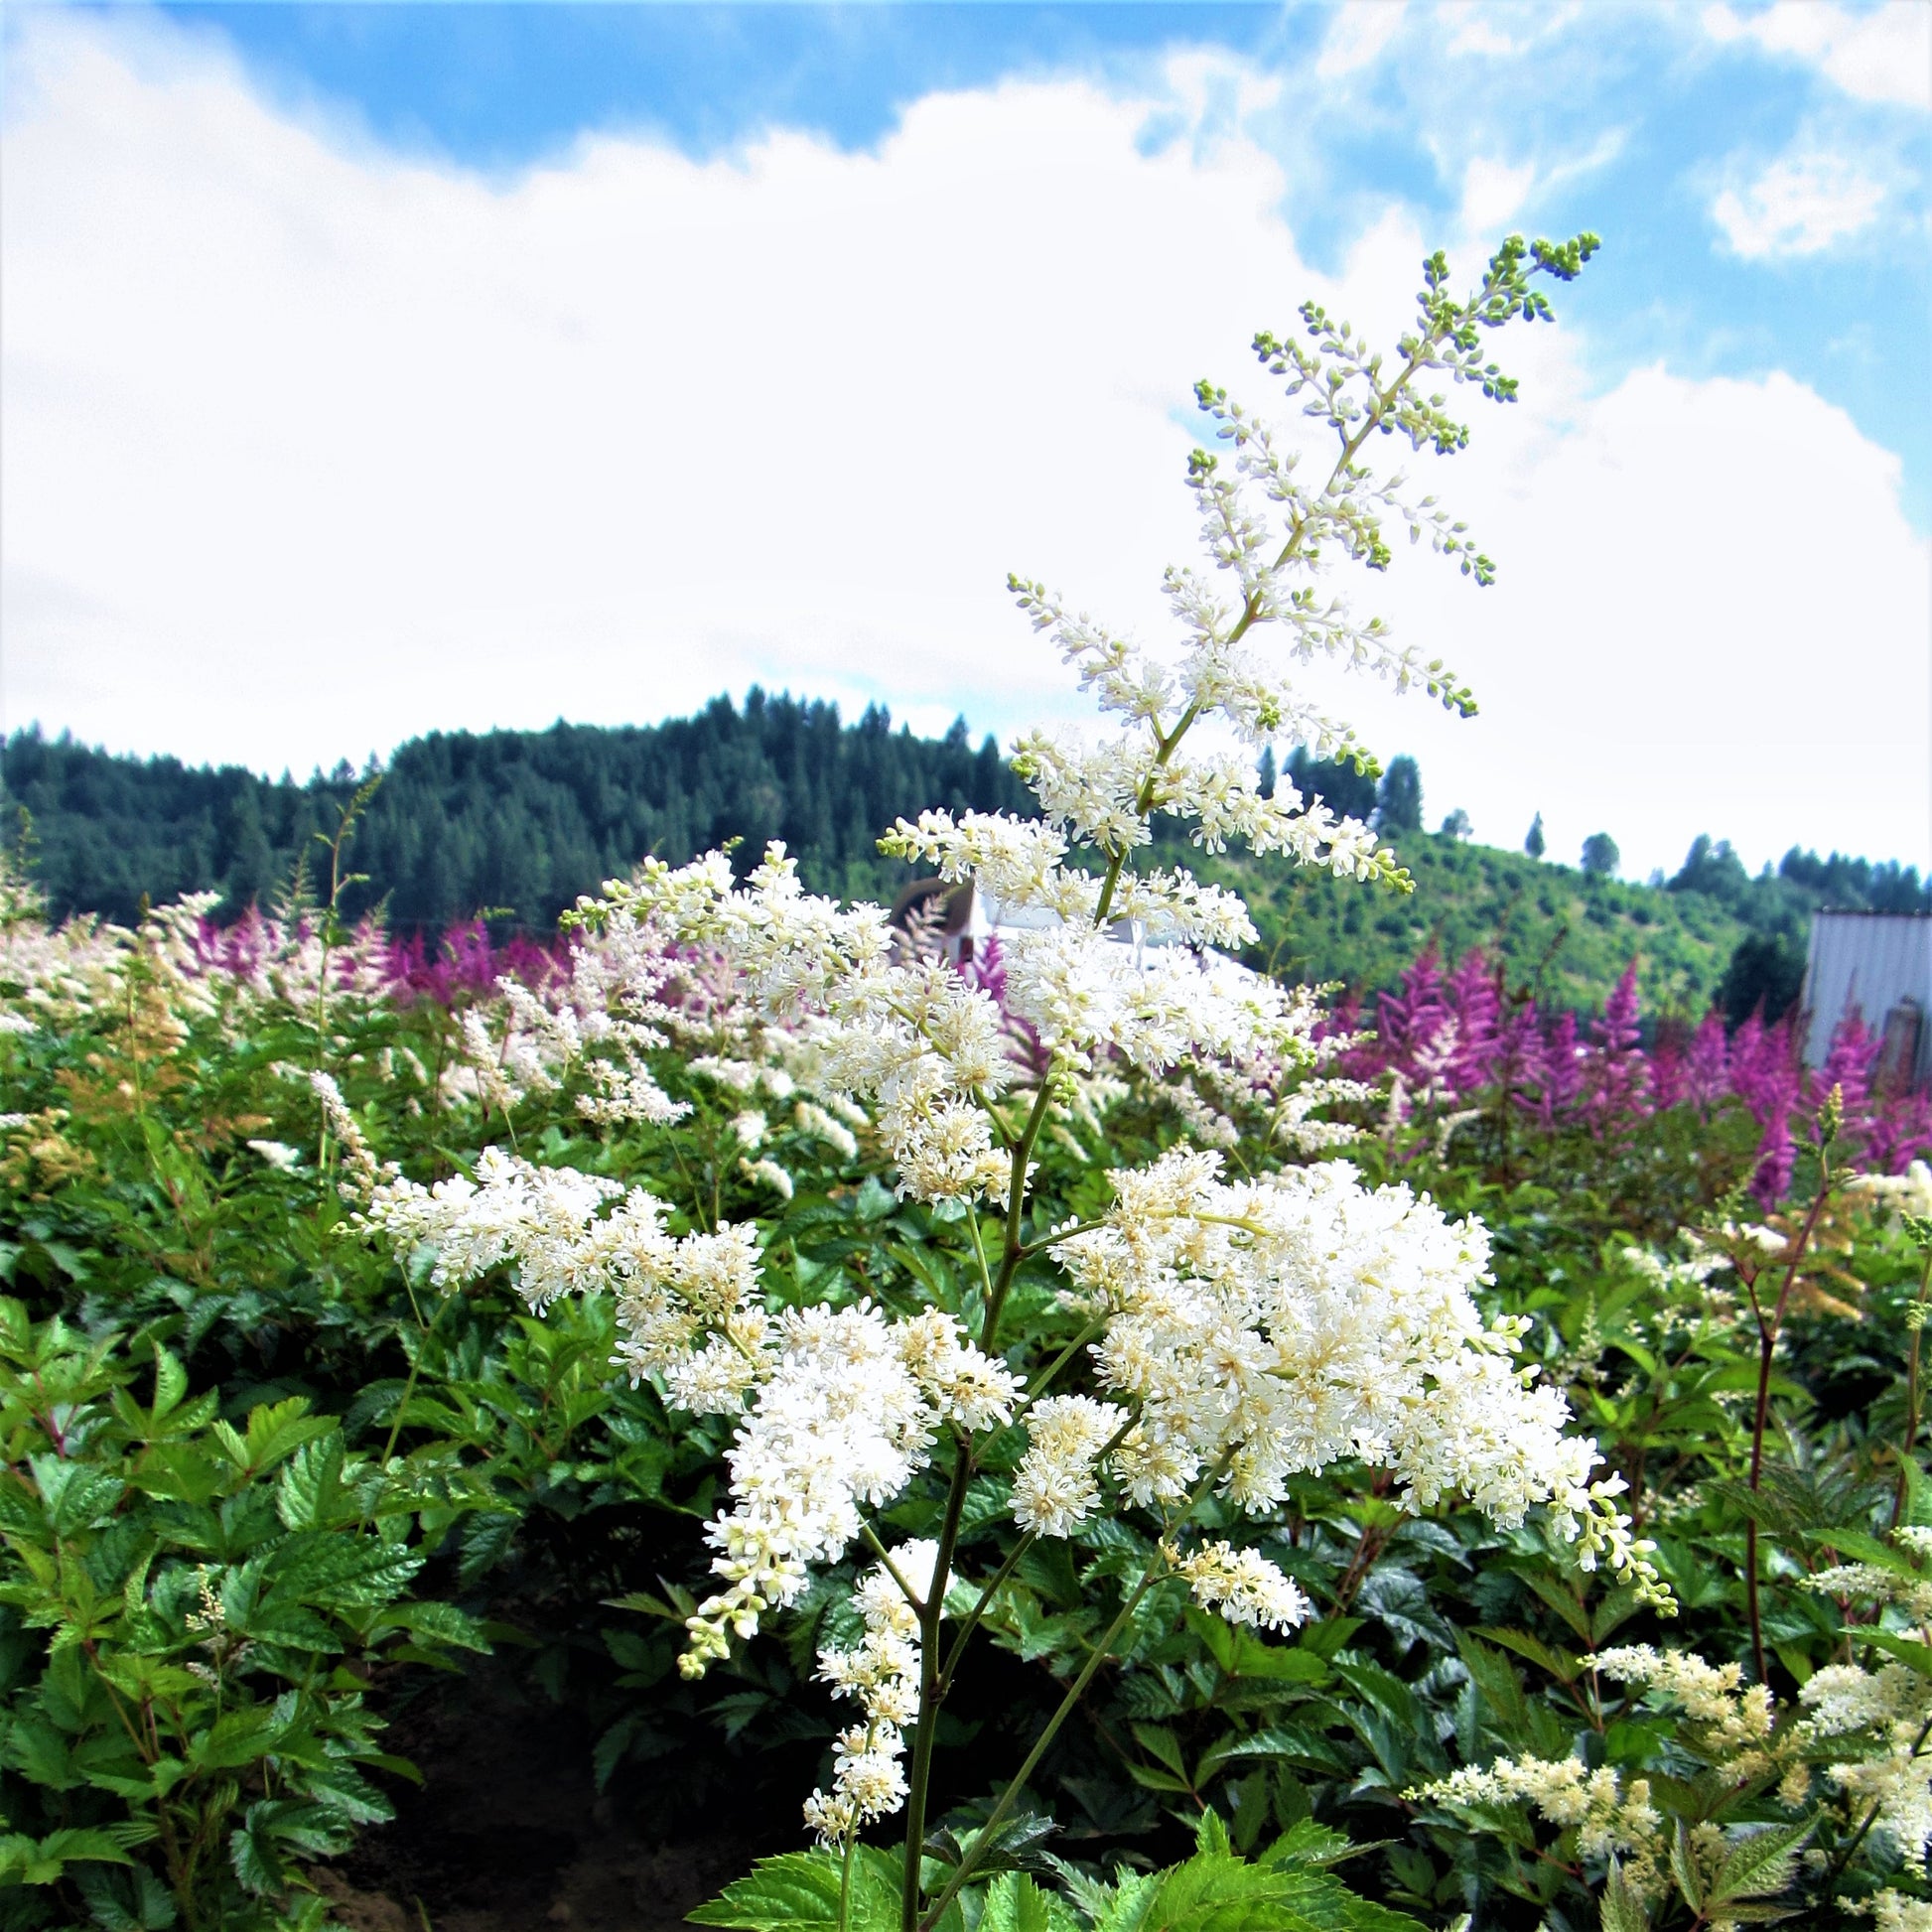 Cloud-like White Blooms of the "Bridal Veil" Astilbe